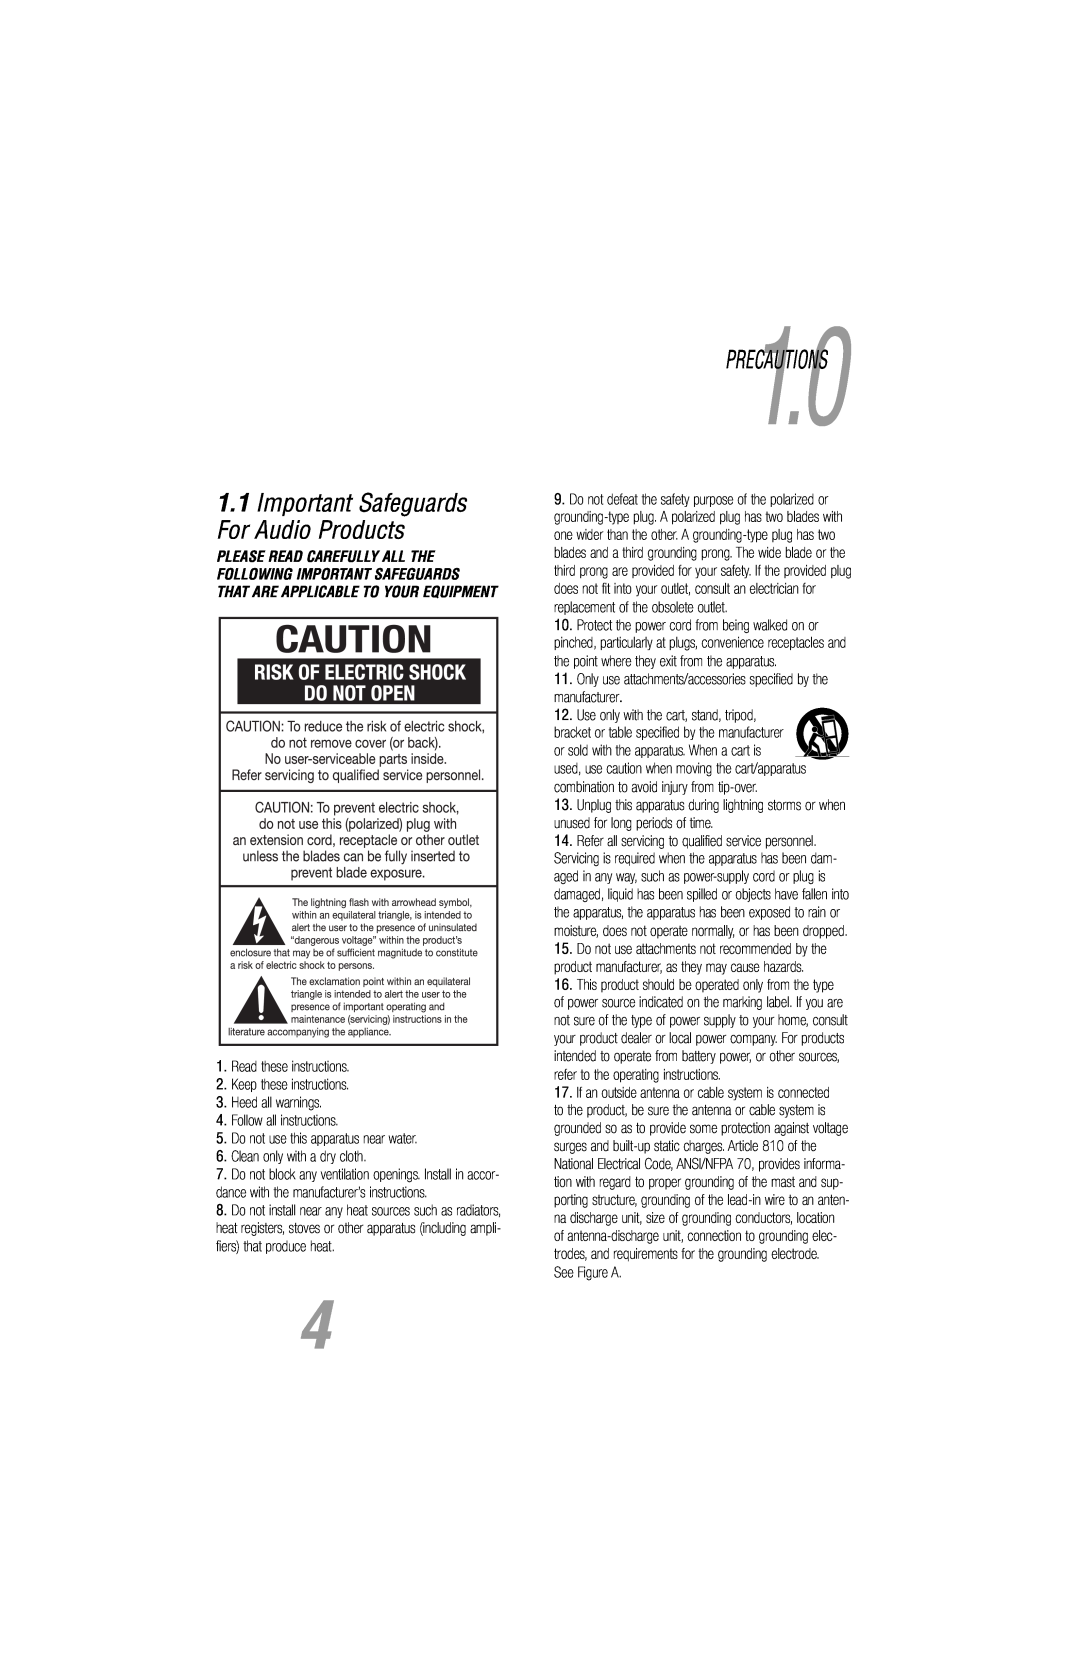 JBL S5160 PRECAUTIONS1.0, 1.1Important Safeguards For Audio Products, Read these instructions, Follow all instructions 